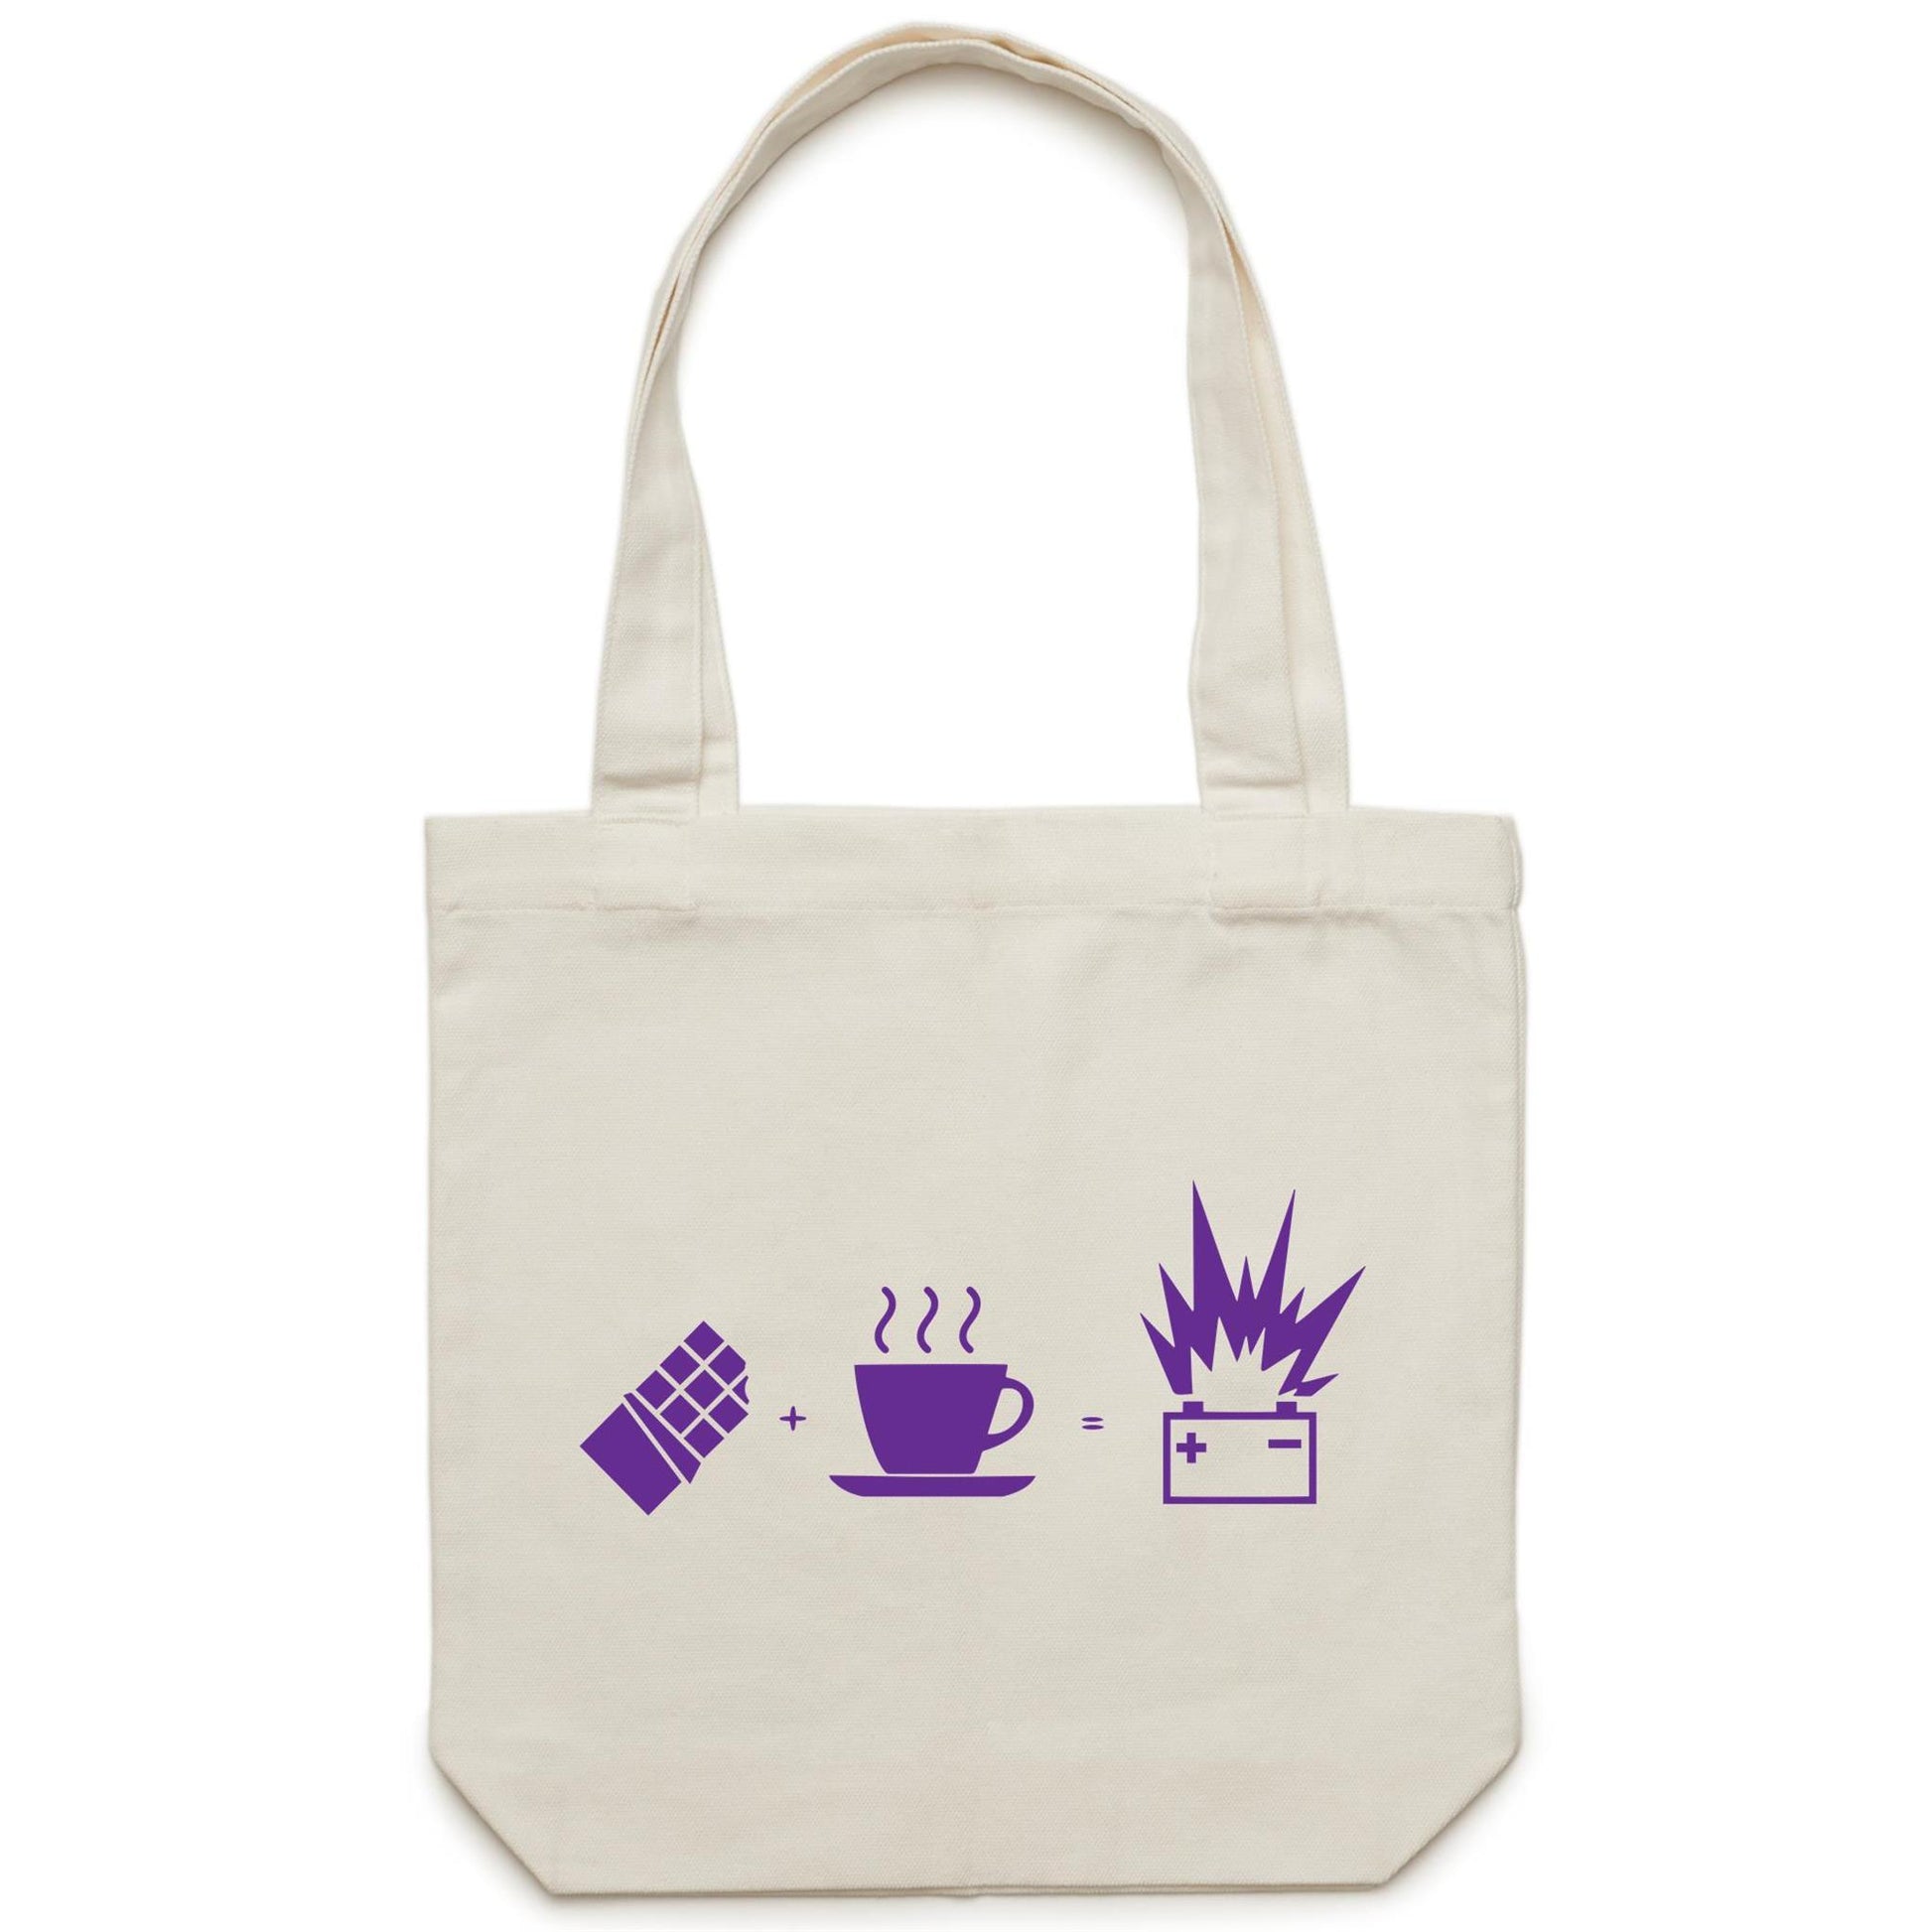 Chocolate + Coffee = Energy - Canvas Tote Bag Cream One-Size Tote Bag Coffee